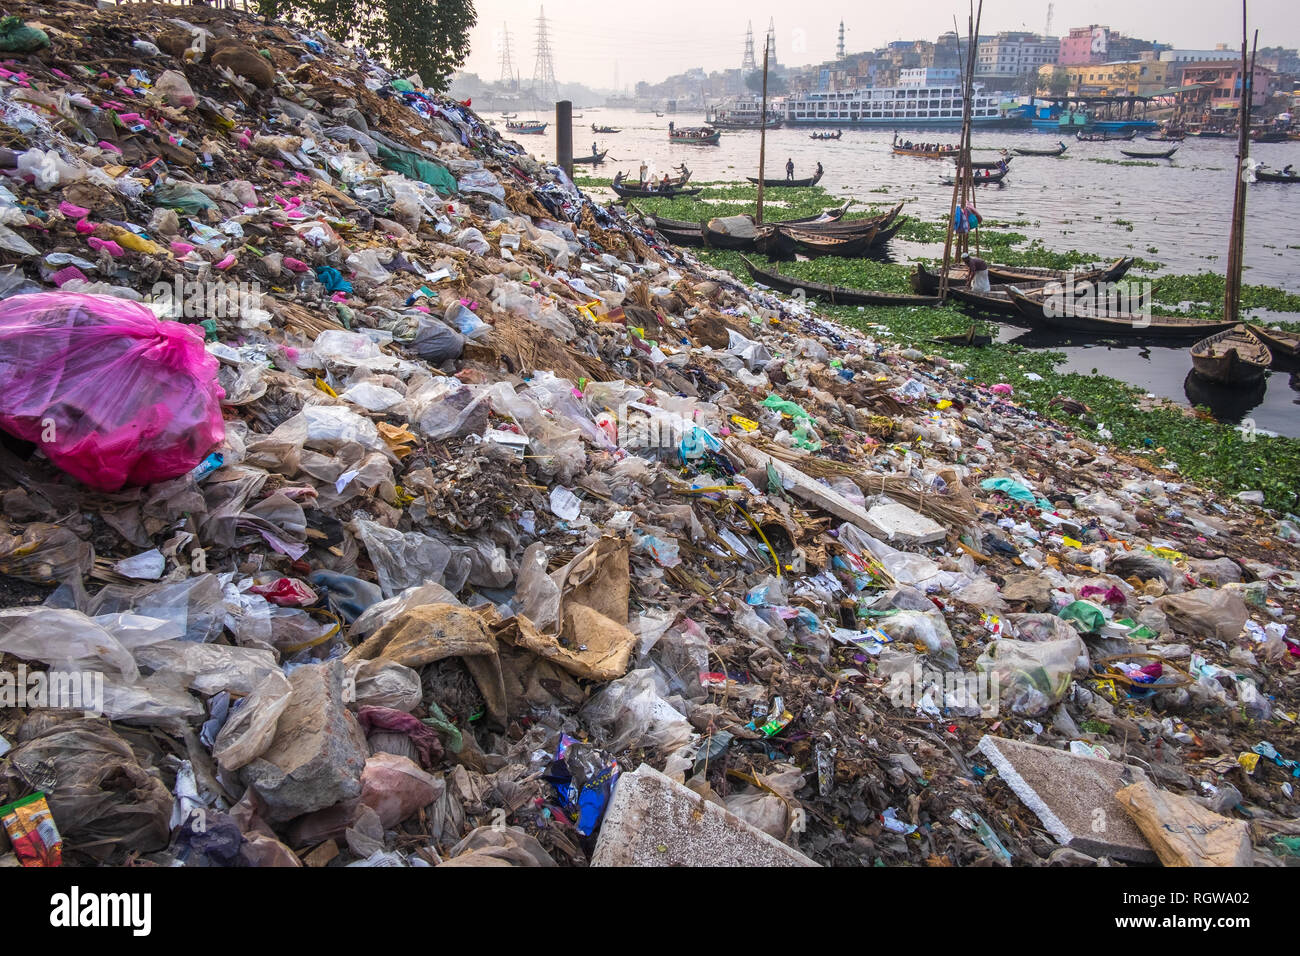 garbage and plastic pollution on the river bank in Dhaka, Bangladesh, riverside and boats in the background Stock Photo